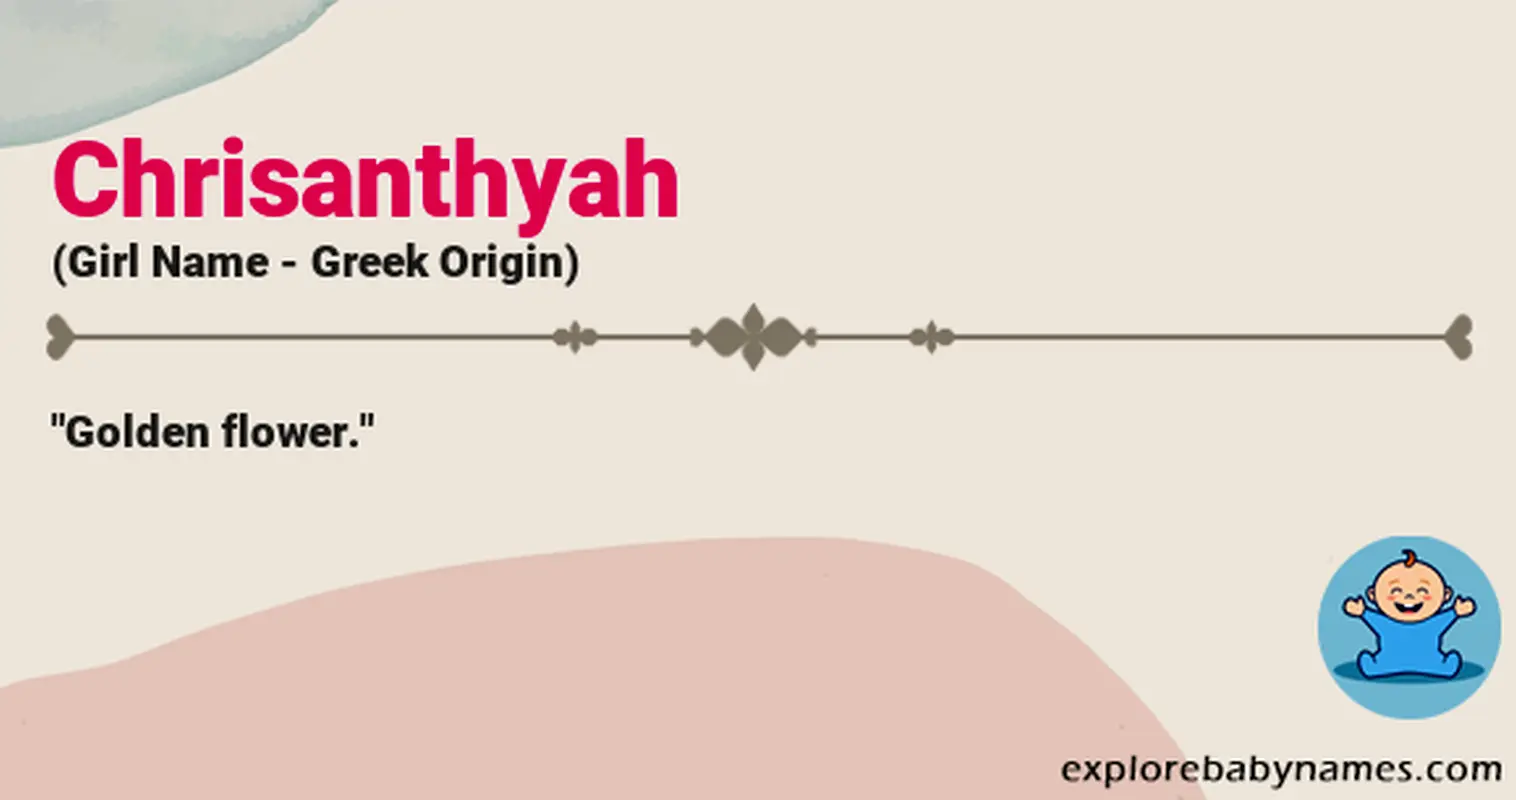 Meaning of Chrisanthyah